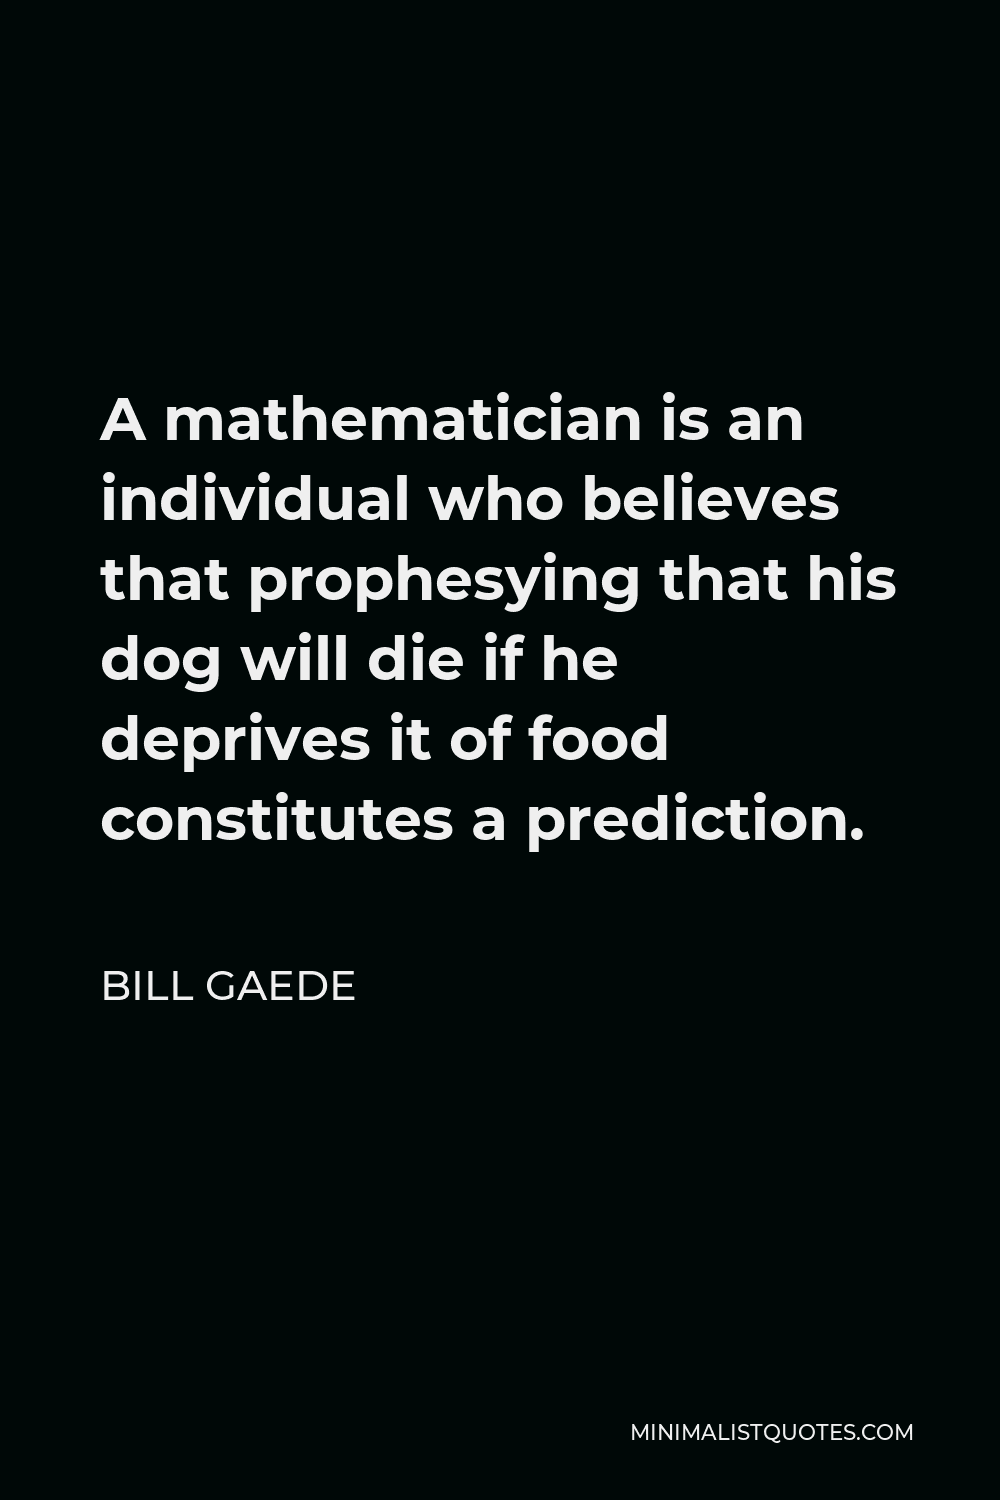 Bill Gaede Quote - A mathematician is an individual who believes that prophesying that his dog will die if he deprives it of food constitutes a prediction.